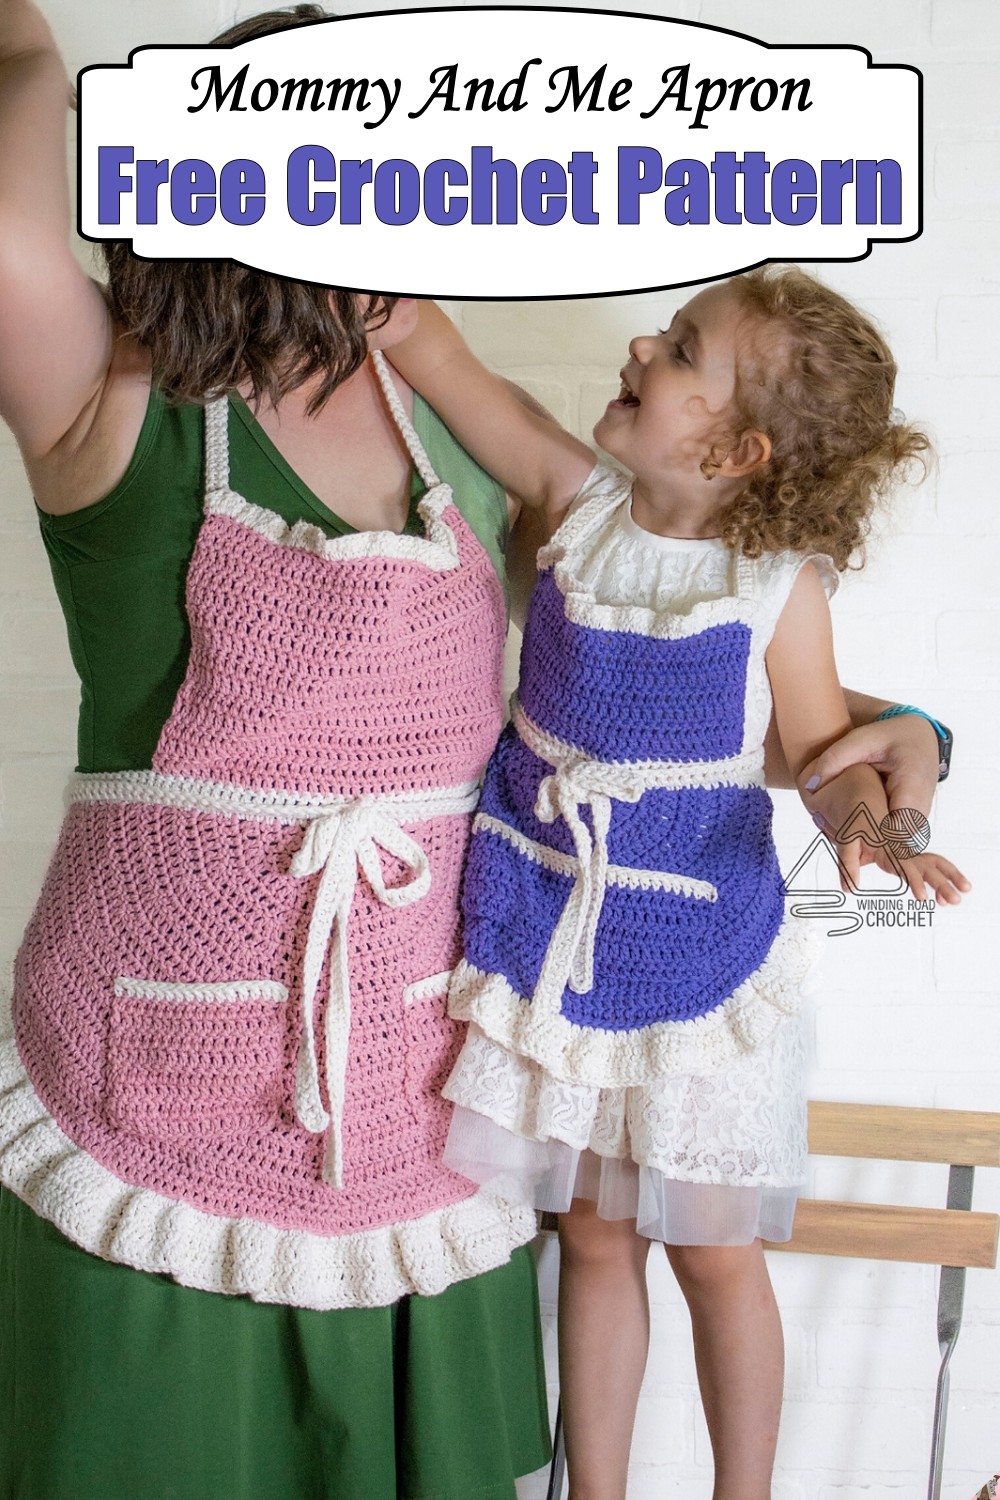 Mommy And Me Apron